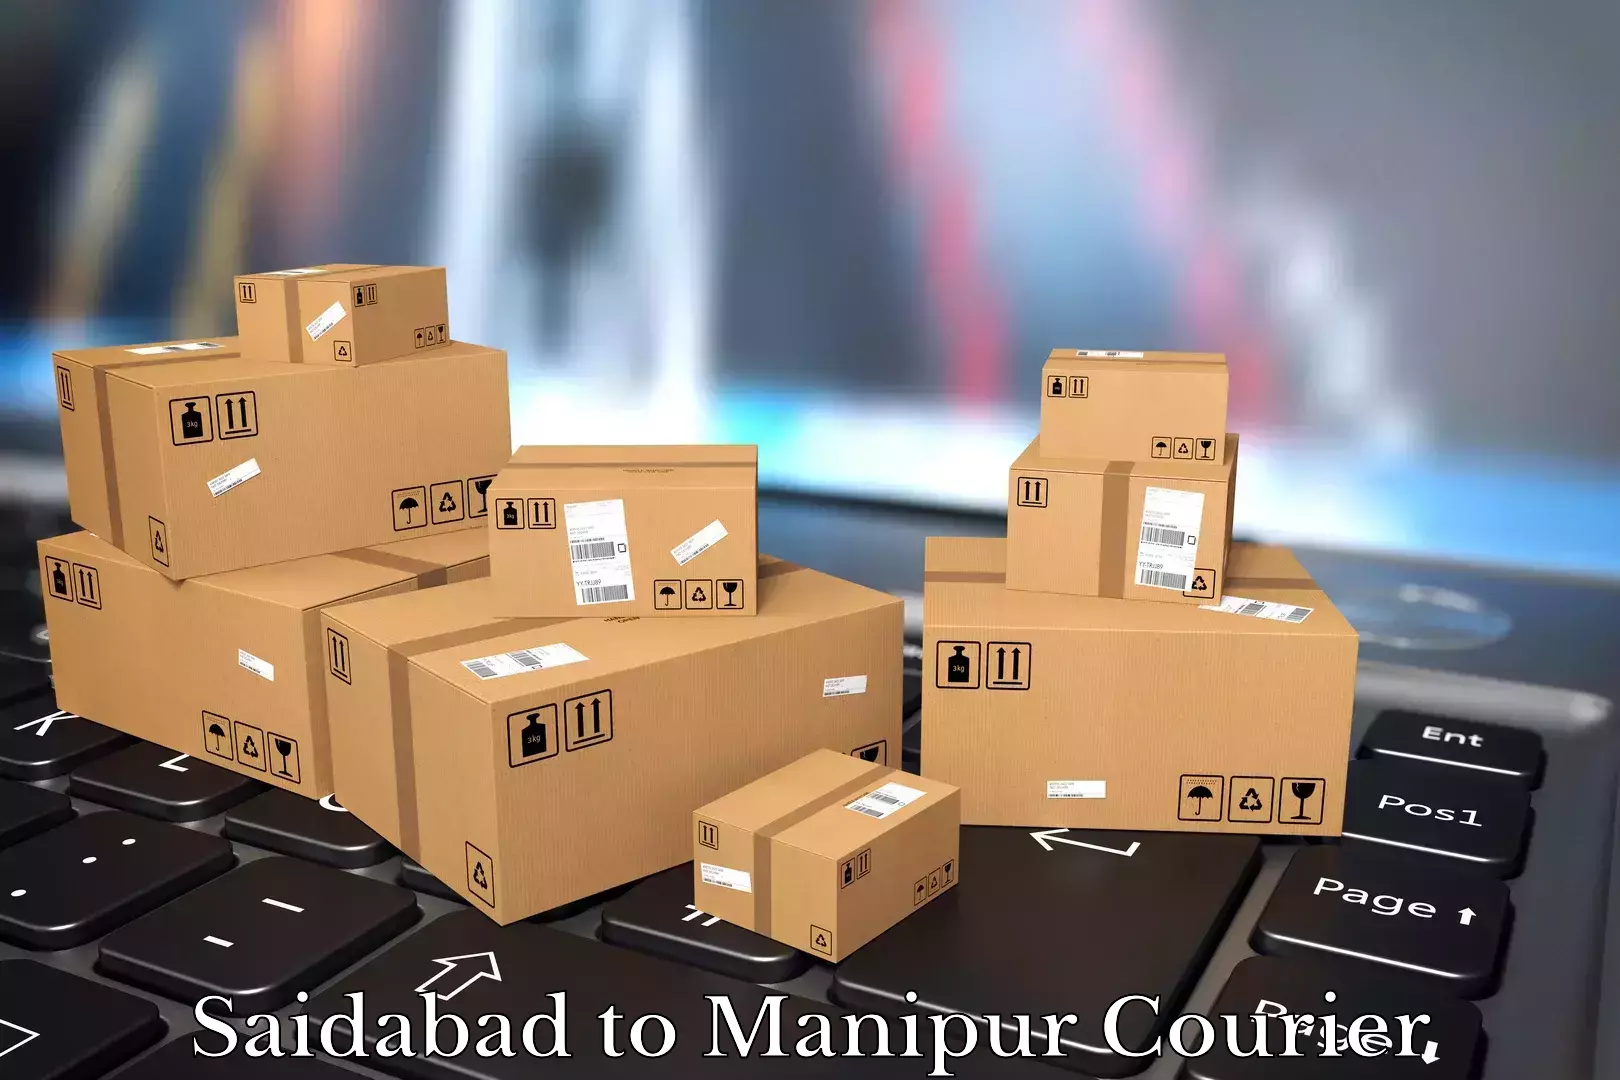 Furniture delivery service Saidabad to Manipur